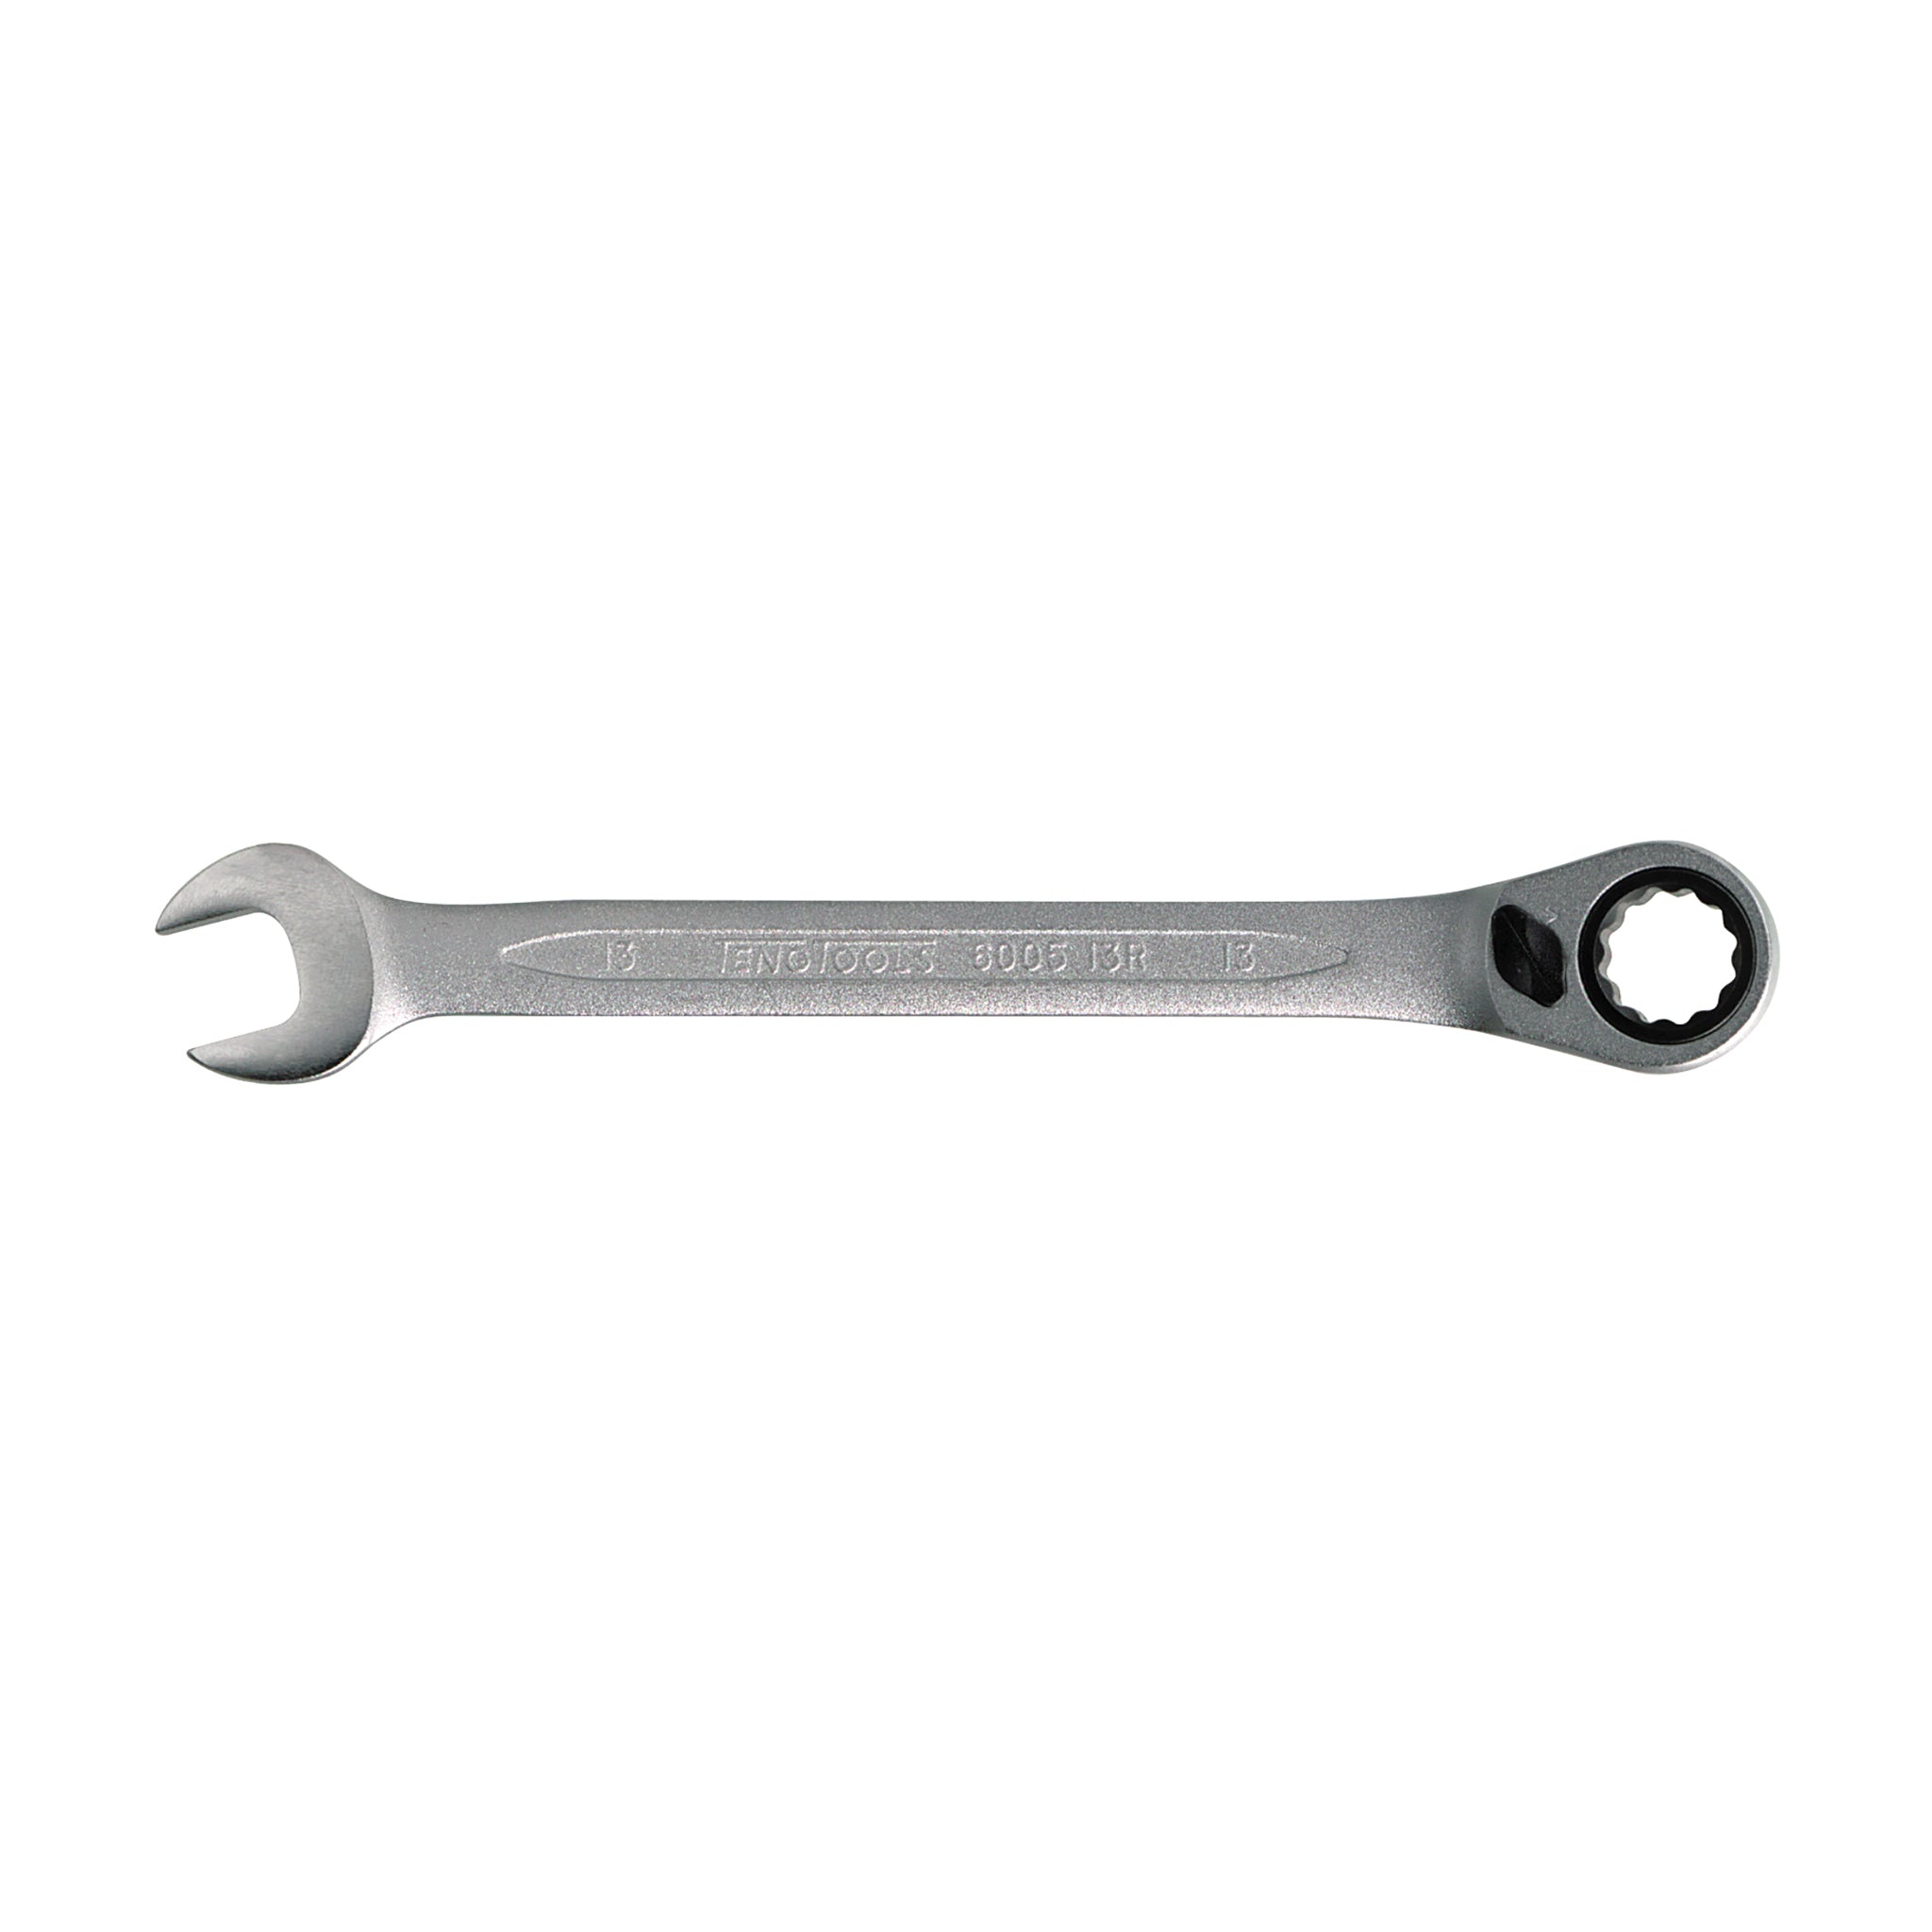 72 Teeth Ratchet Combination Metric Wrenches With Flip Reverse Lever - 27mm